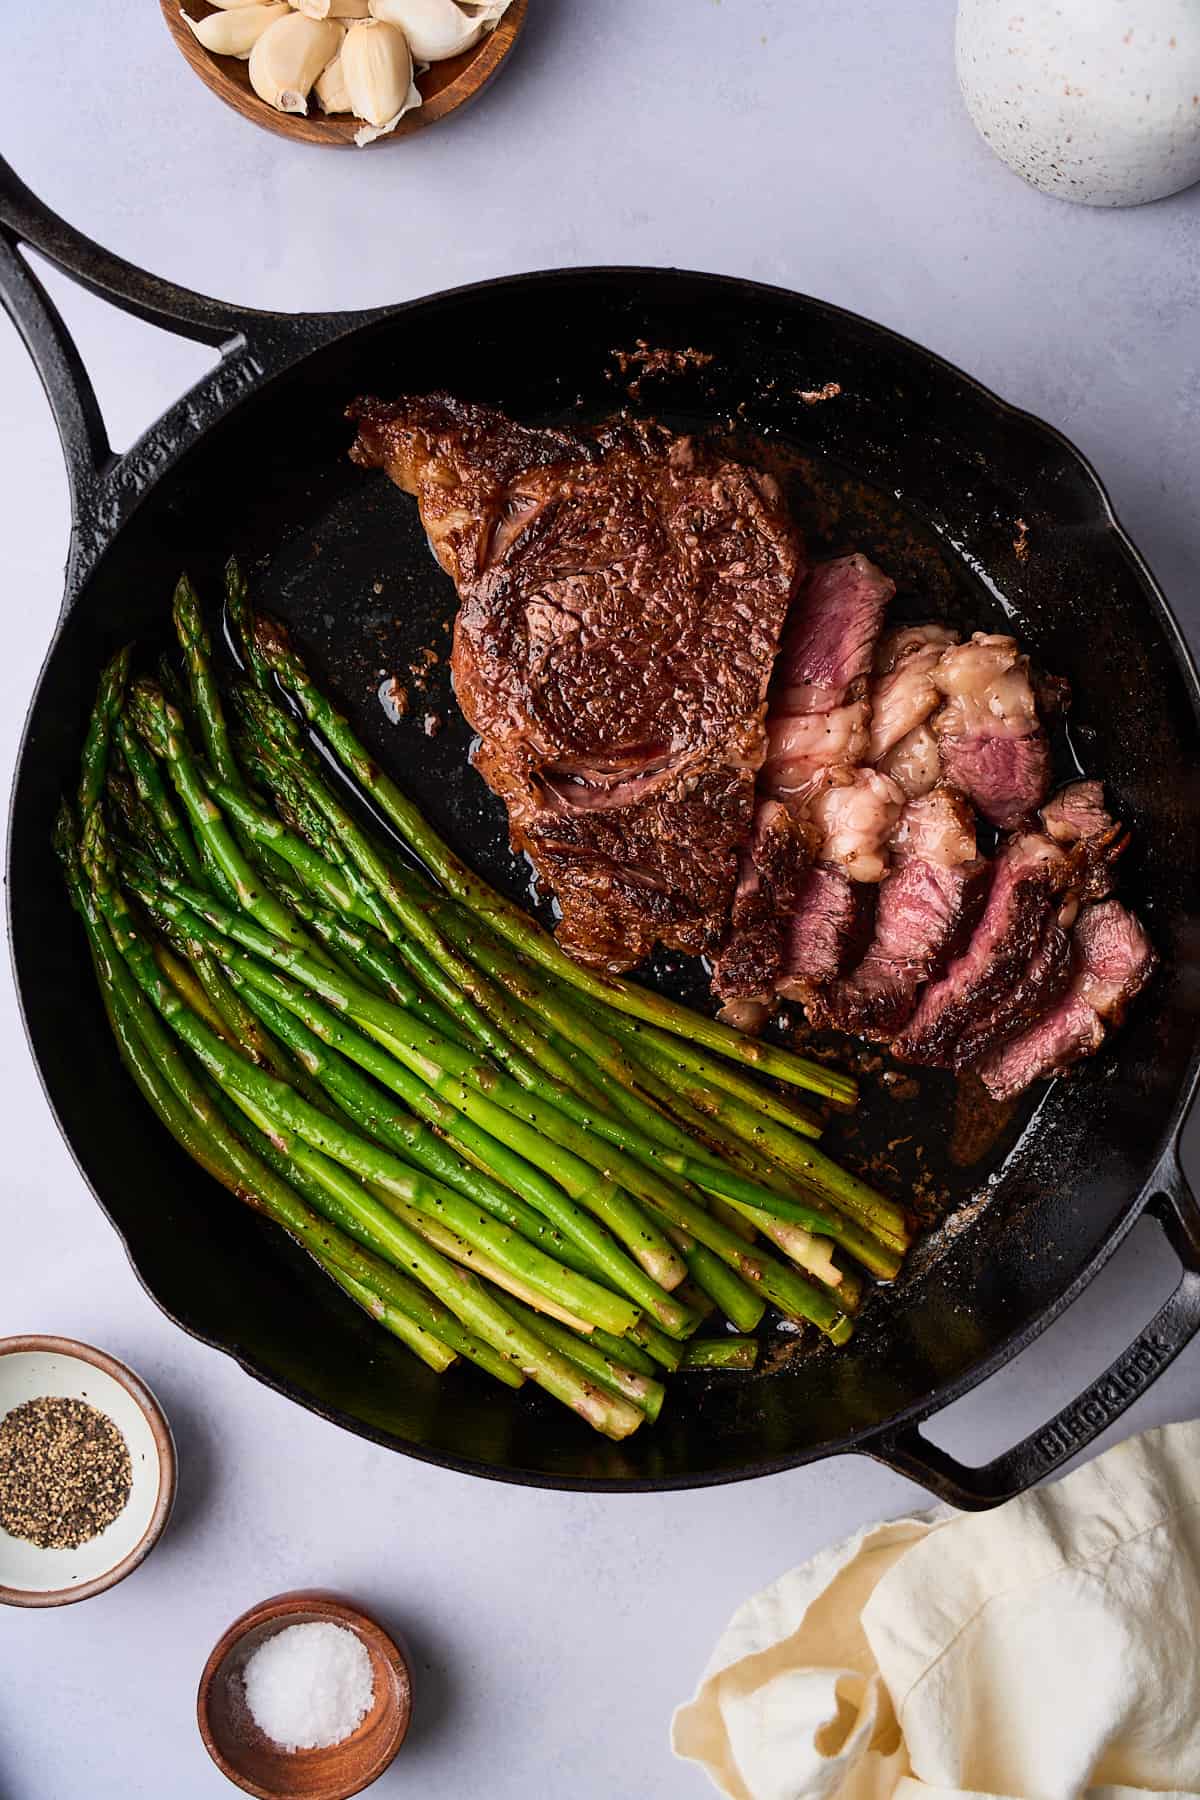 Ribeye steak and asparagus cooked in a cast iron skillet and cut into to reveal the center cooked a perfect medium rare.